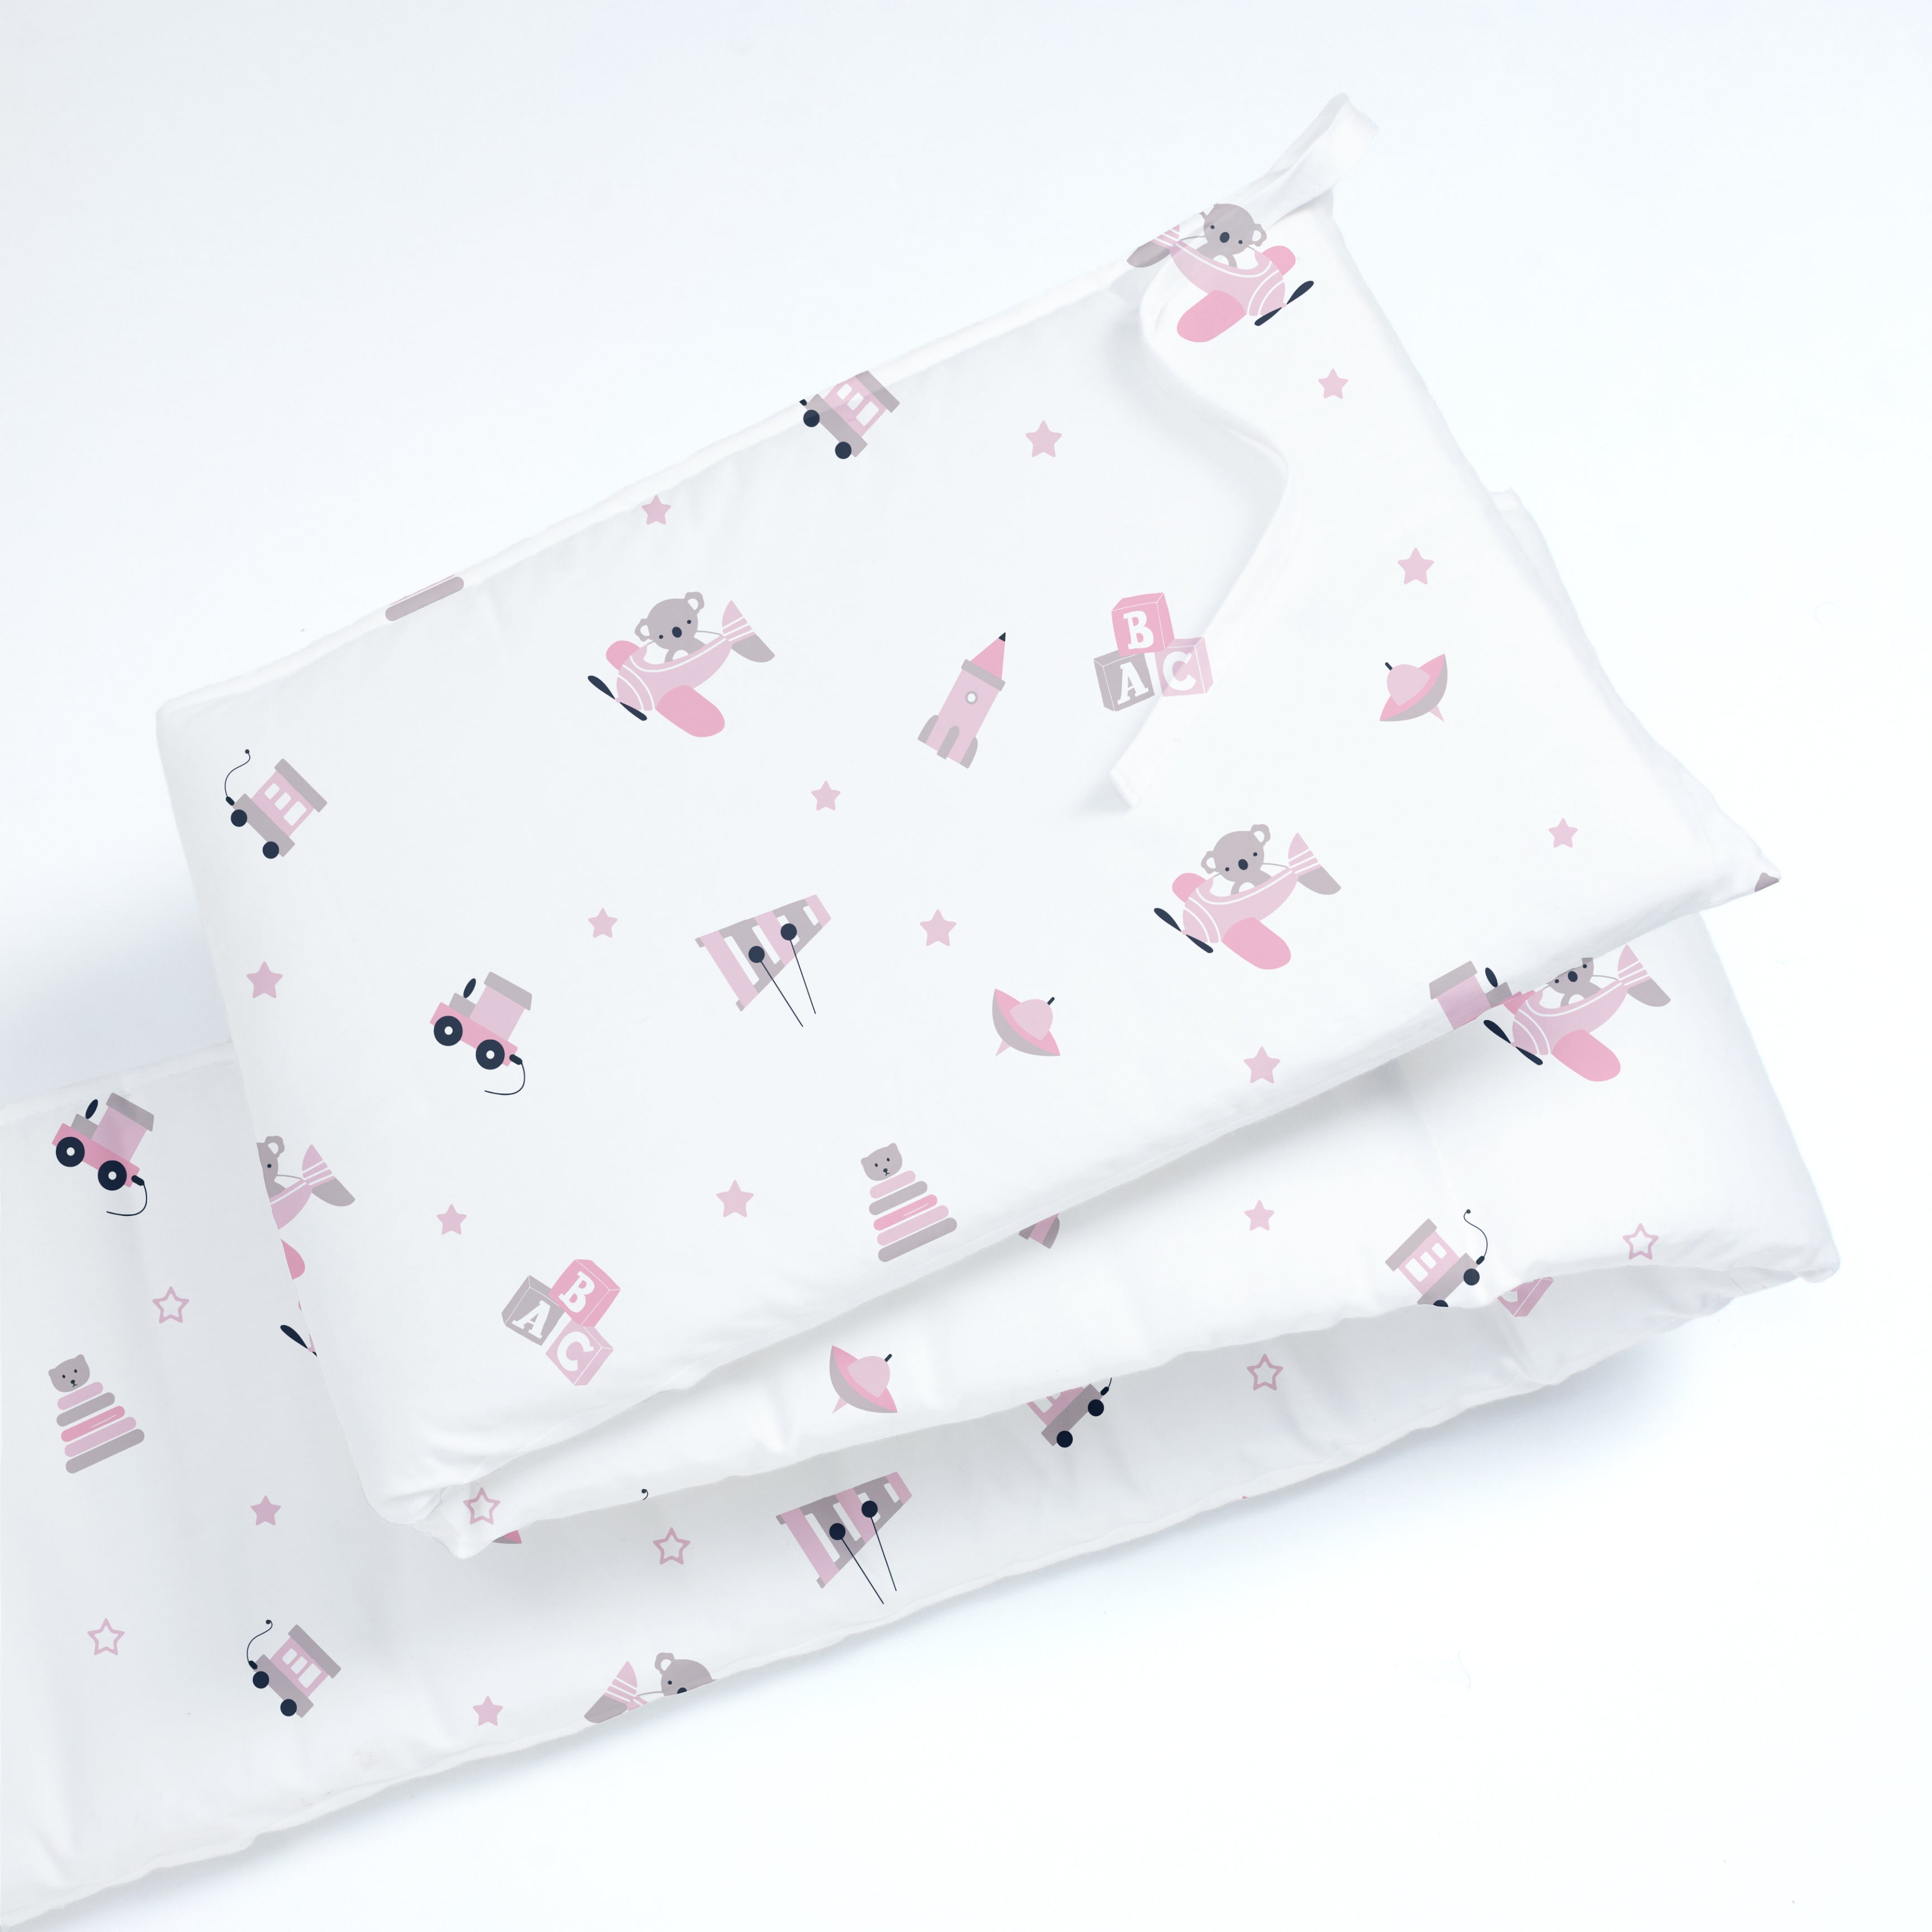 The White Cradle Baby Safe Cot Bumper Pad, Fits all Standard Cribs, Thick Padded Protective Liner for Child Nursery Bed, Soft Organic Cotton Fabric, Breathable, Non-Allergenic - Pink Koala with Horse